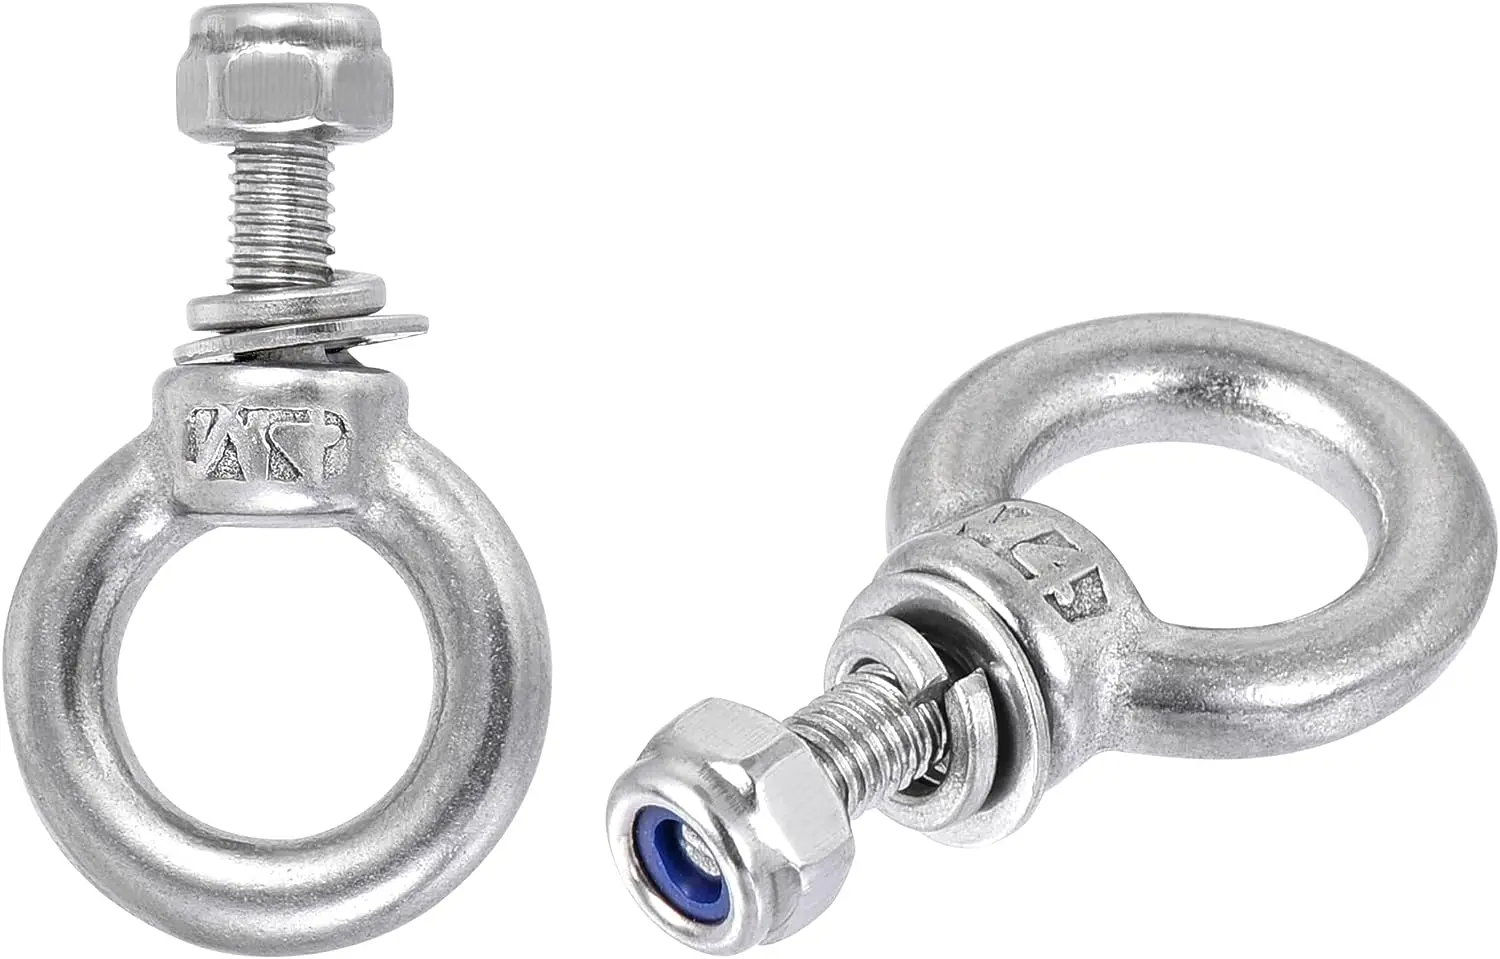 

Lifting Eye Bolt M5 x 13mm Male Thread with Hex Screw Nut Gasket Flat Washer for Hanging Securing Chain Wire Rope, 304 Stainless